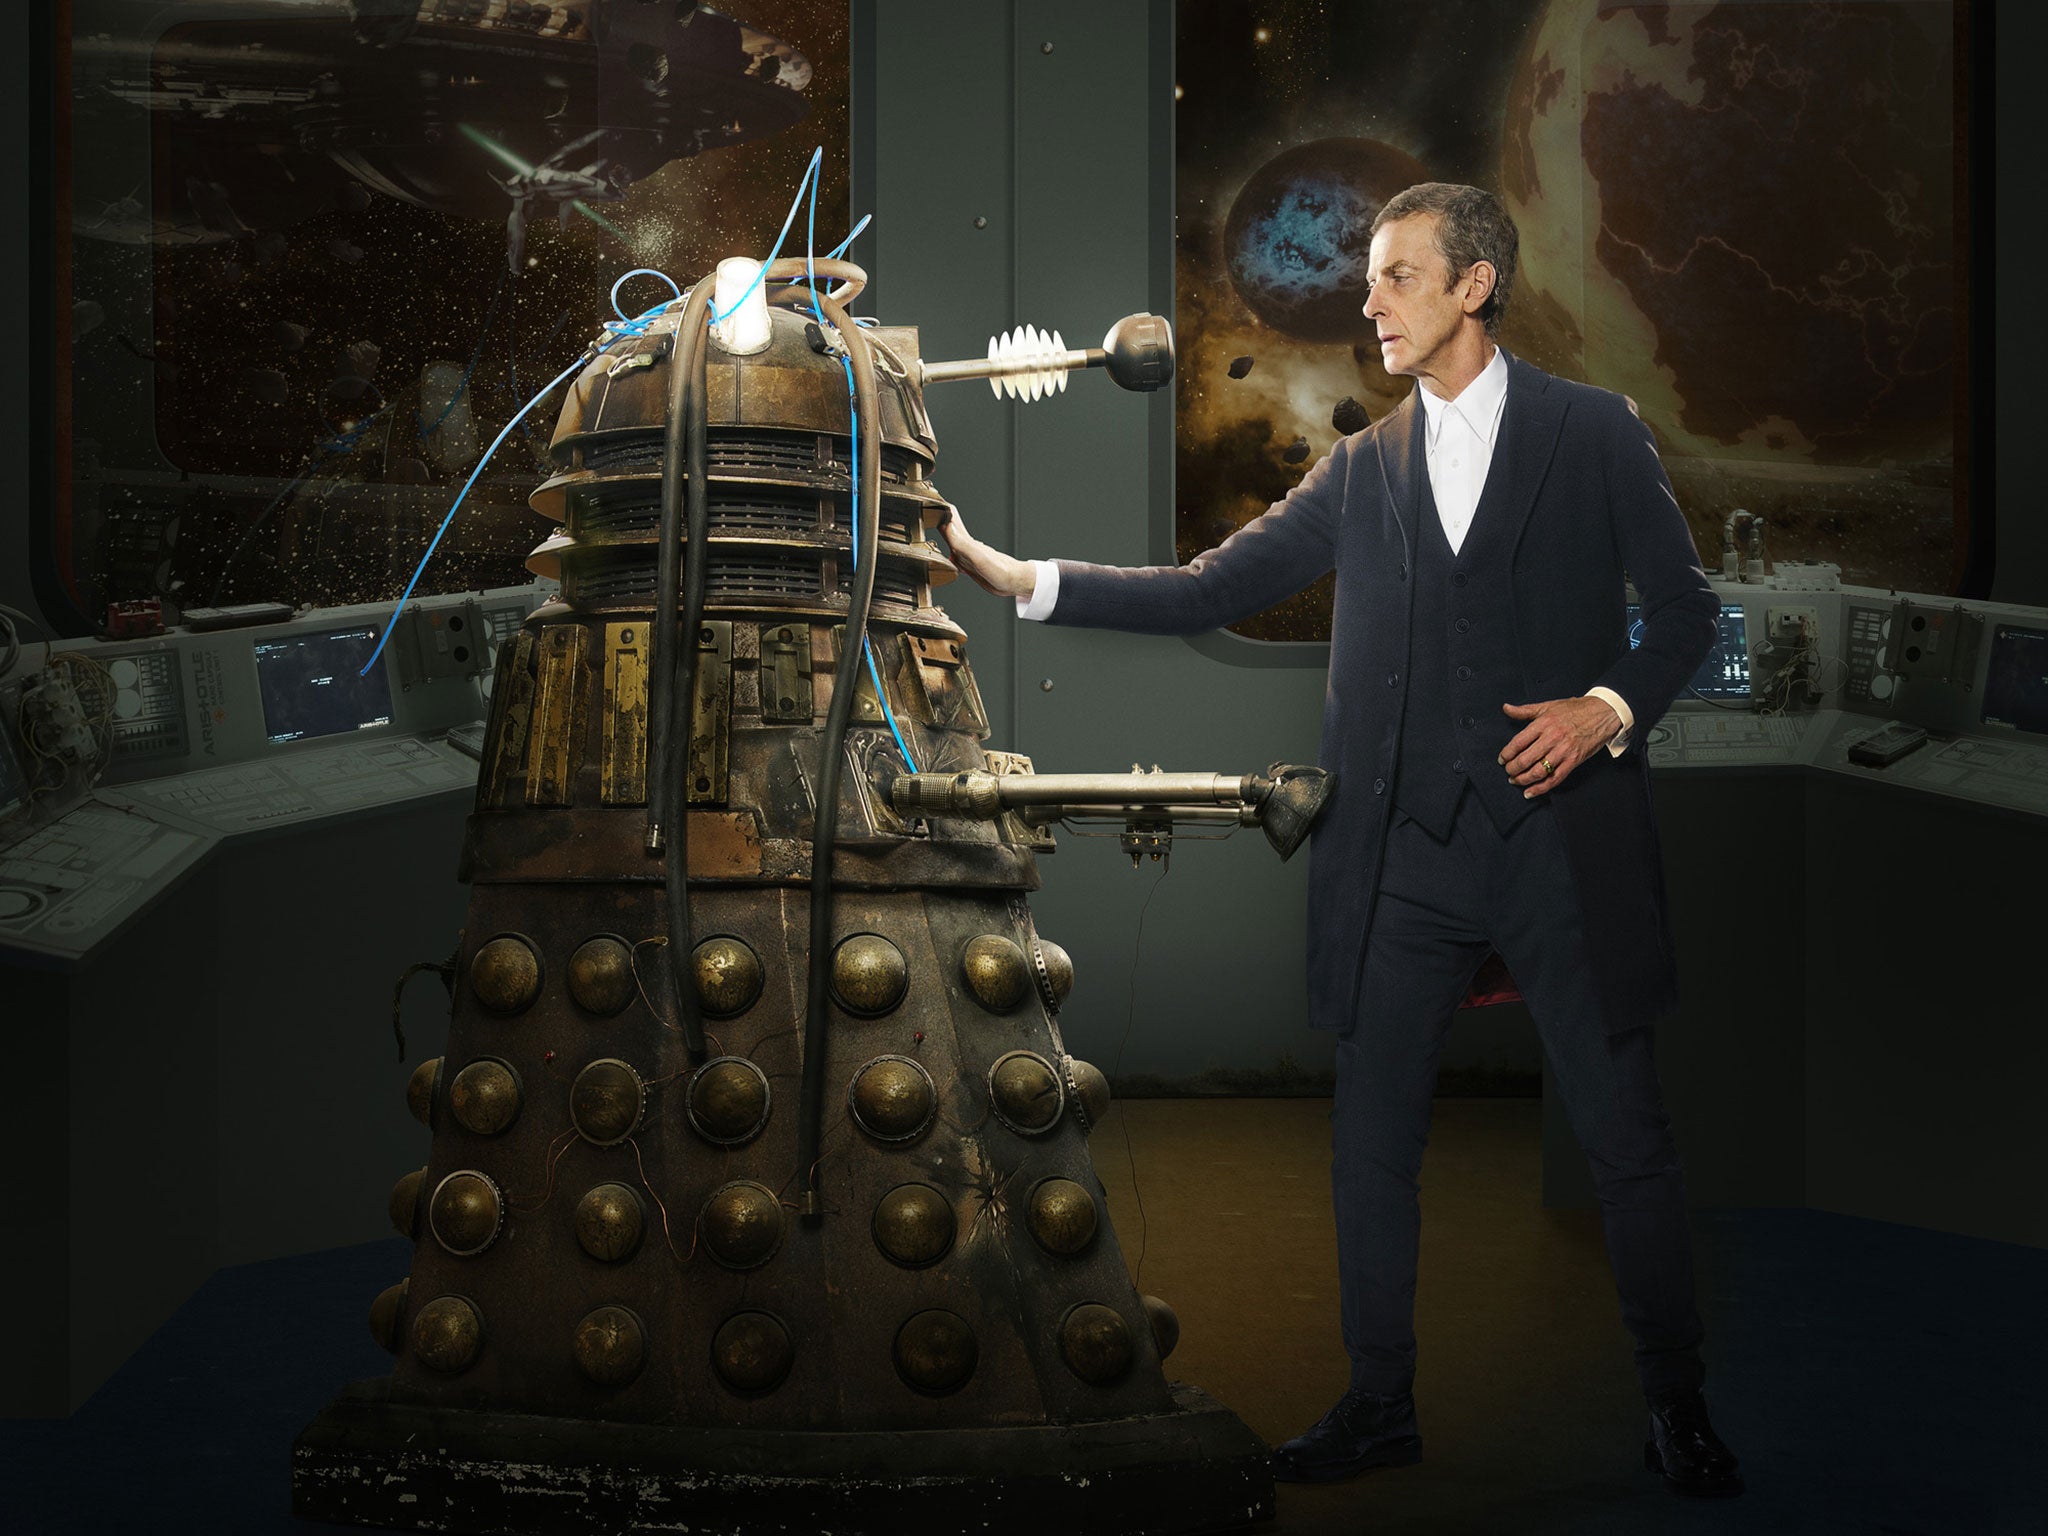 The Doctor and the Dalek meet